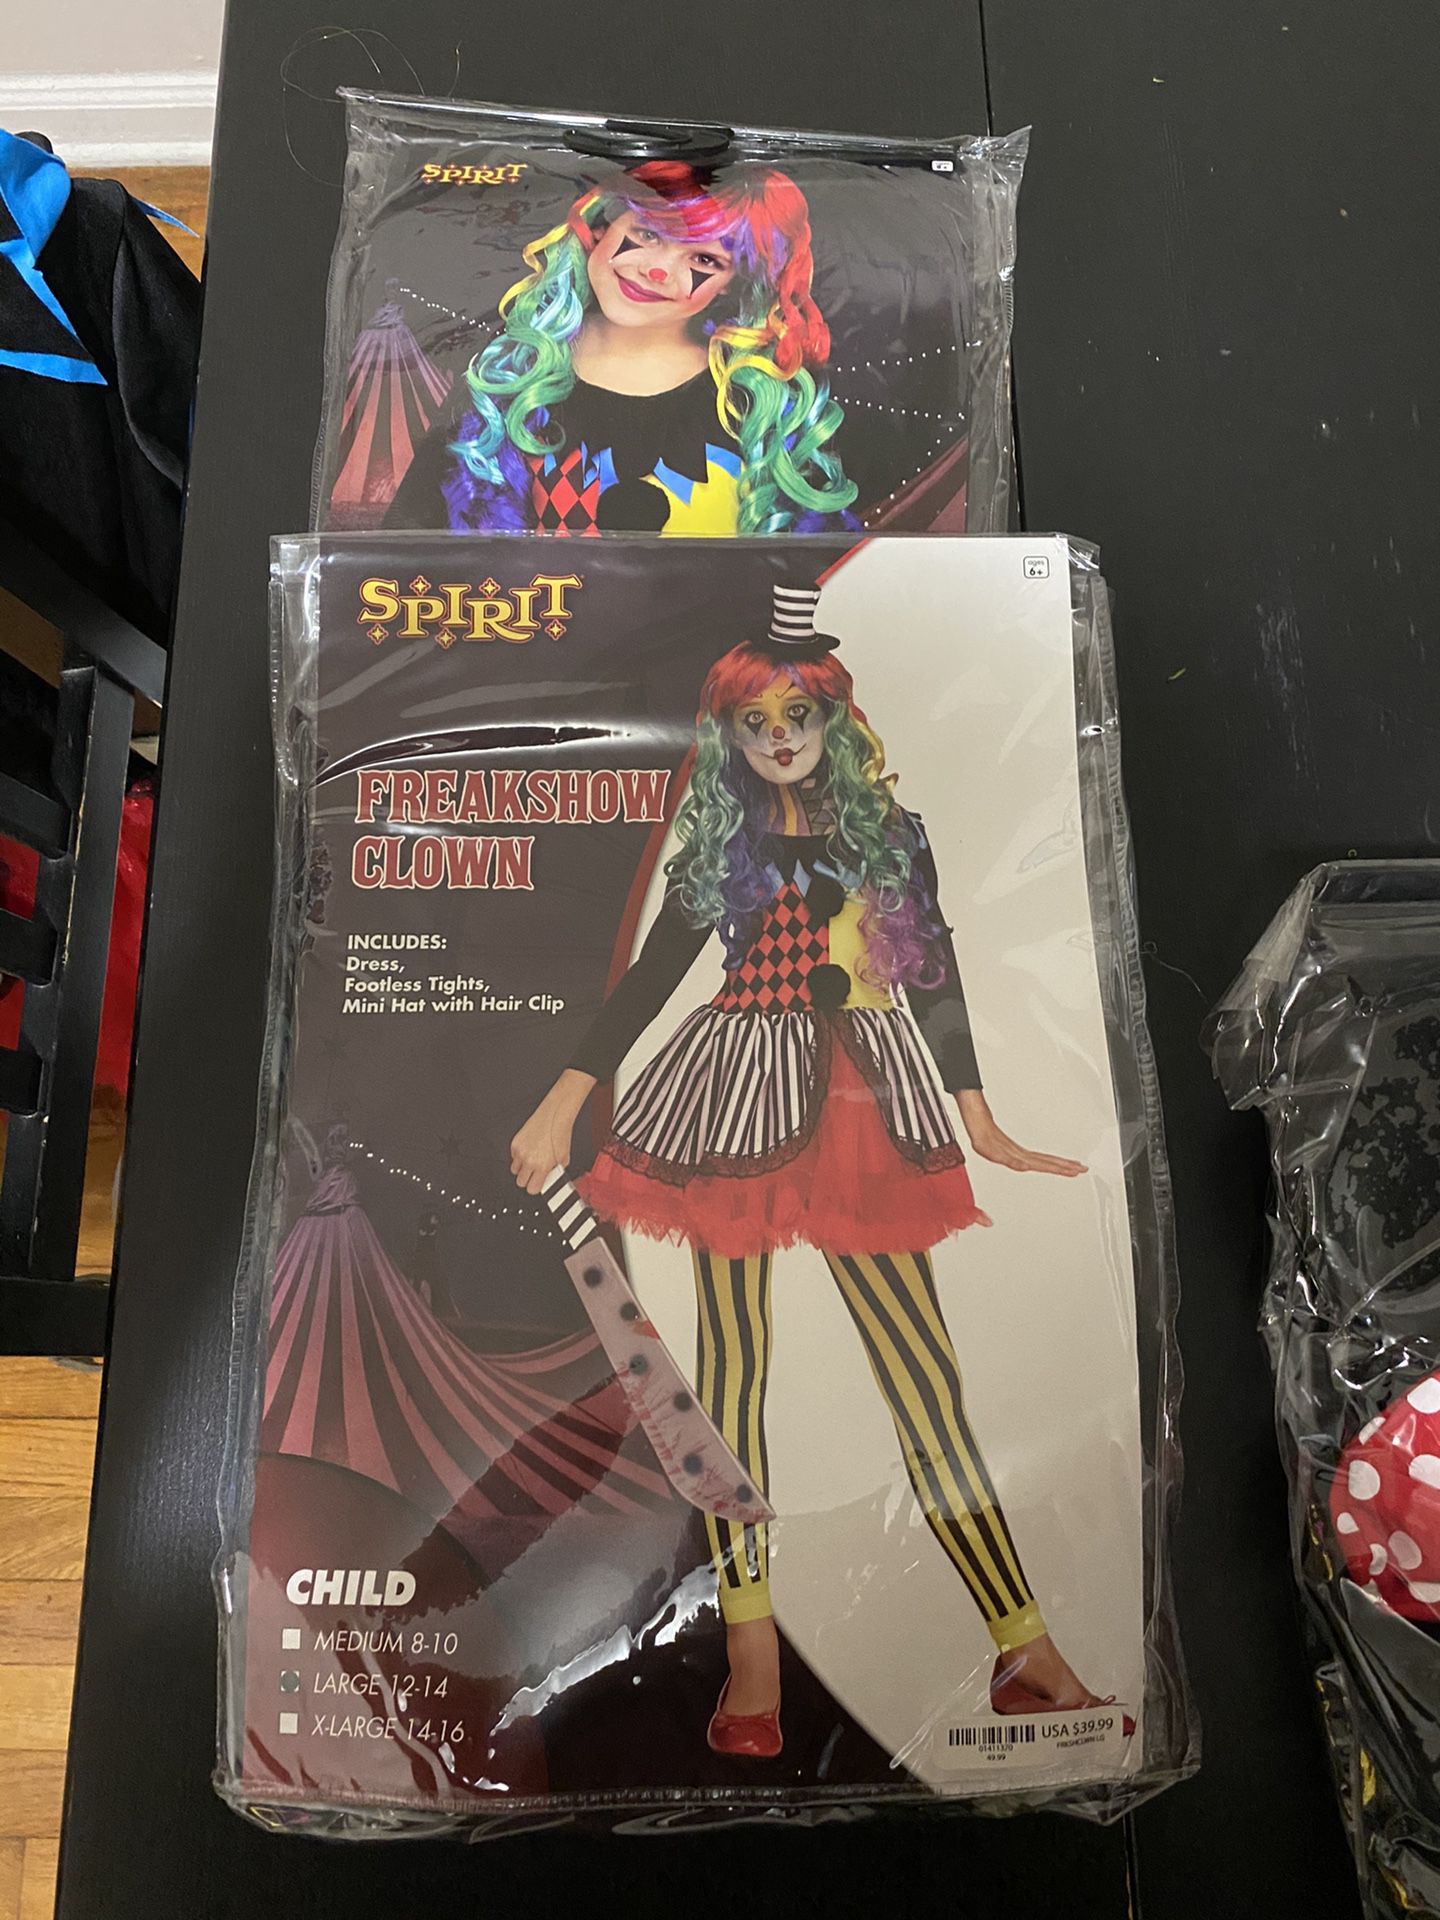 Freakshow Clown Costume With Wig Included